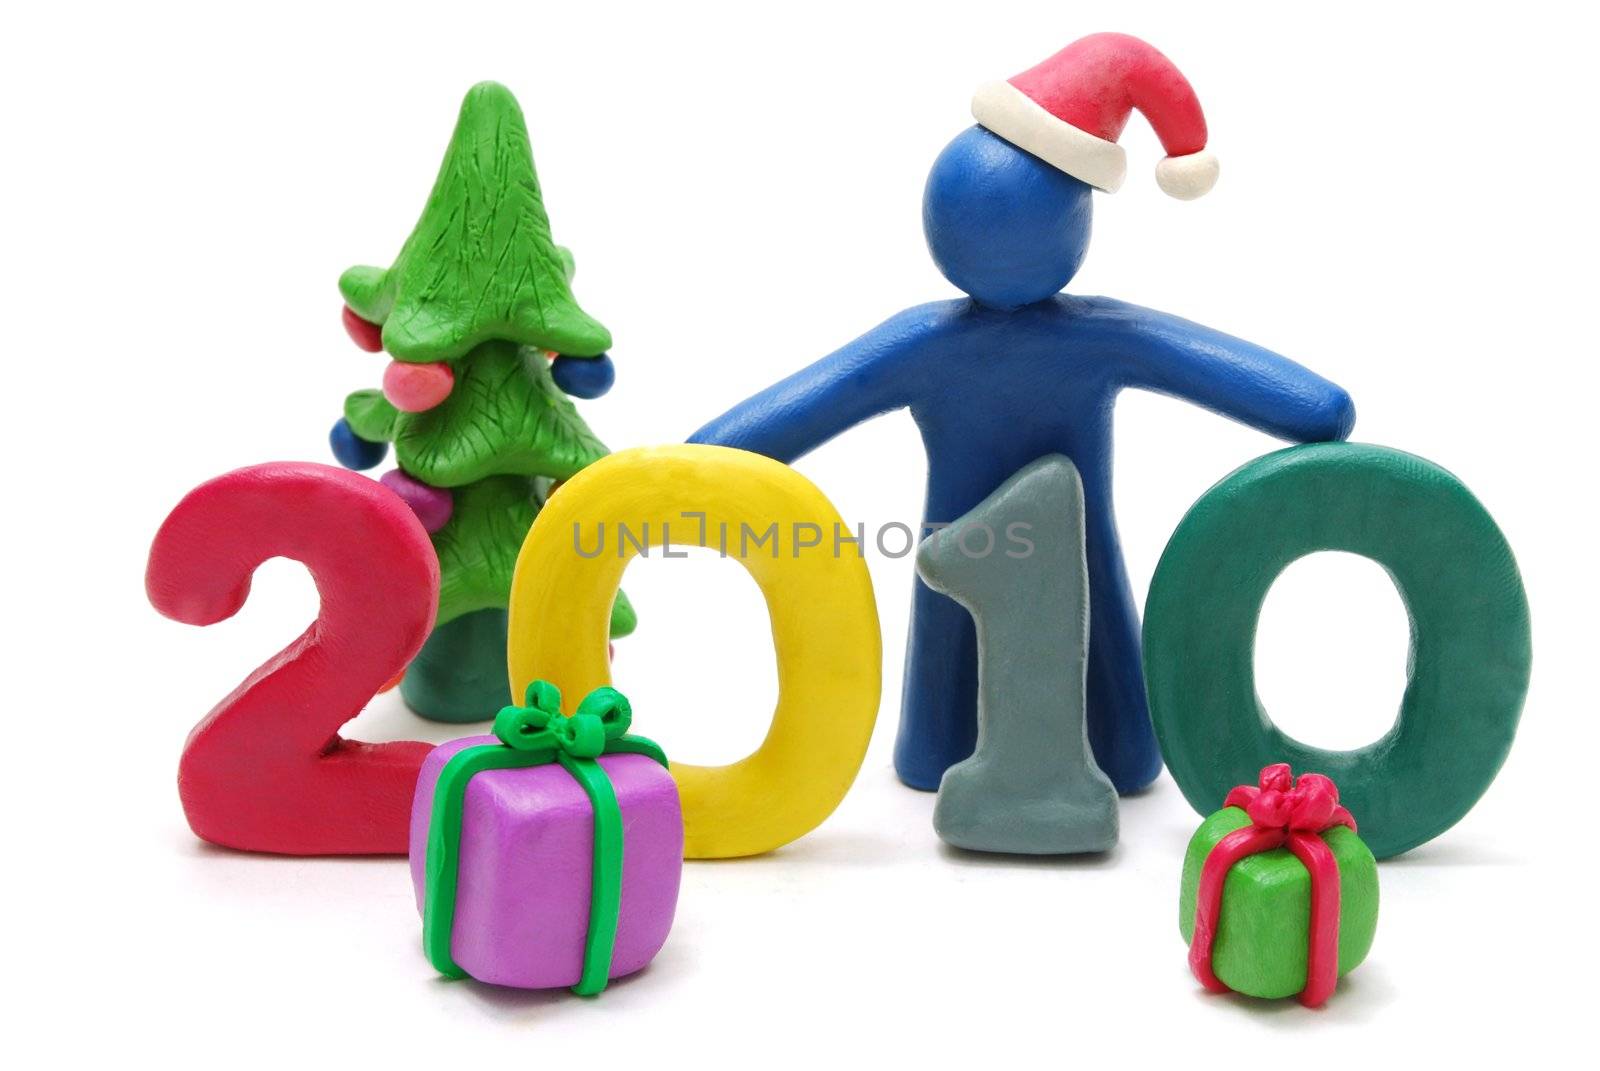 3D New Year Text 2010 Made of Colored Plasticine with Christmas Gifts and Tree Isolated on White Background